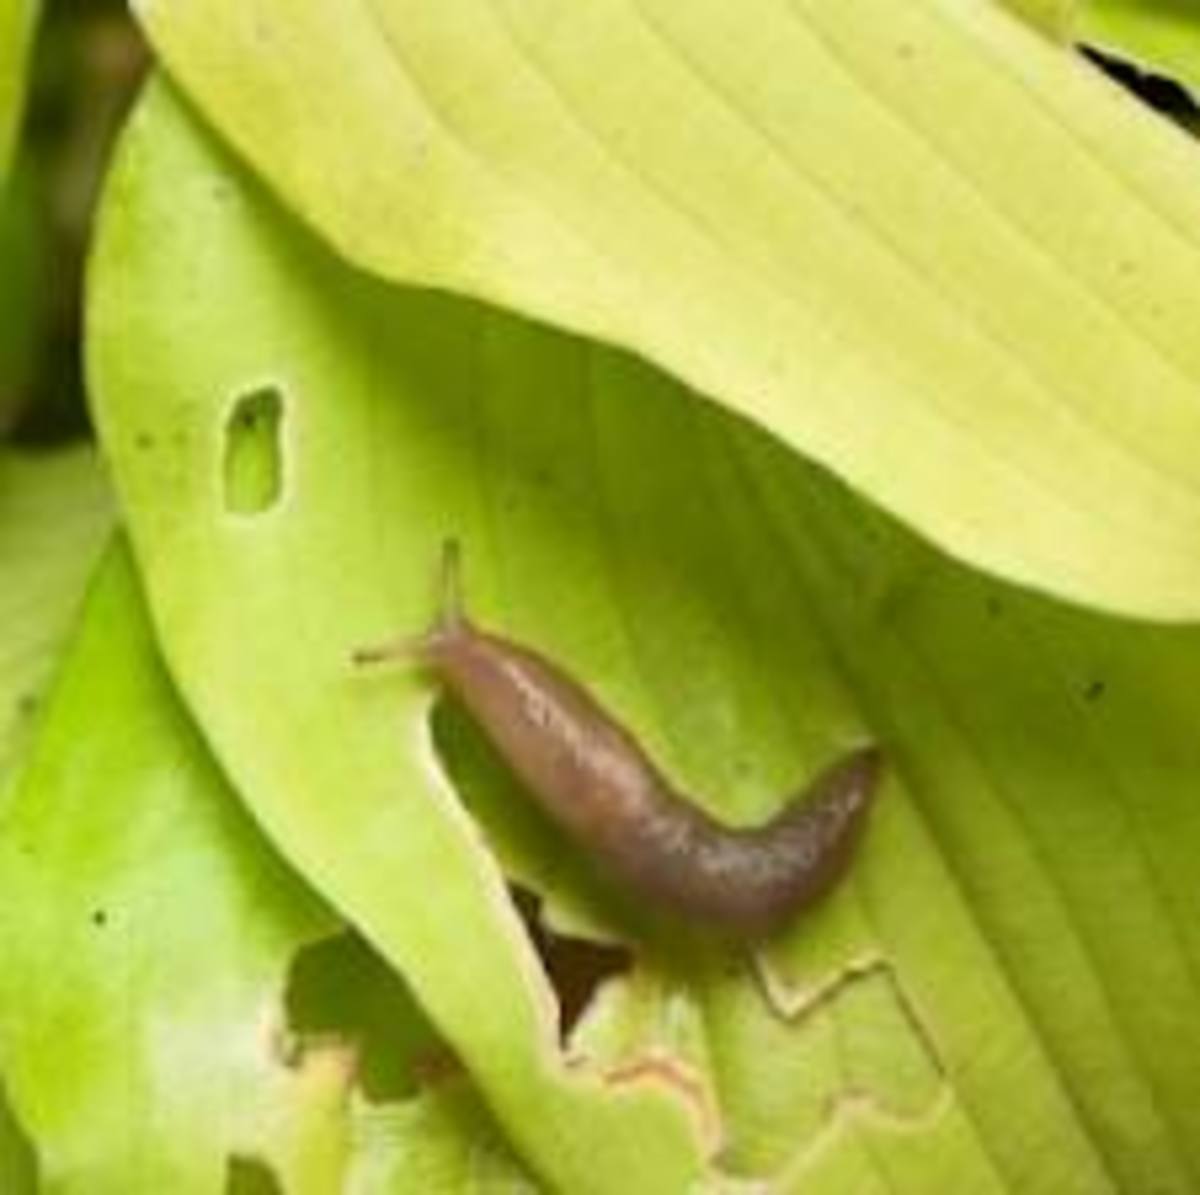 Are slugs eating holes in your hostas?